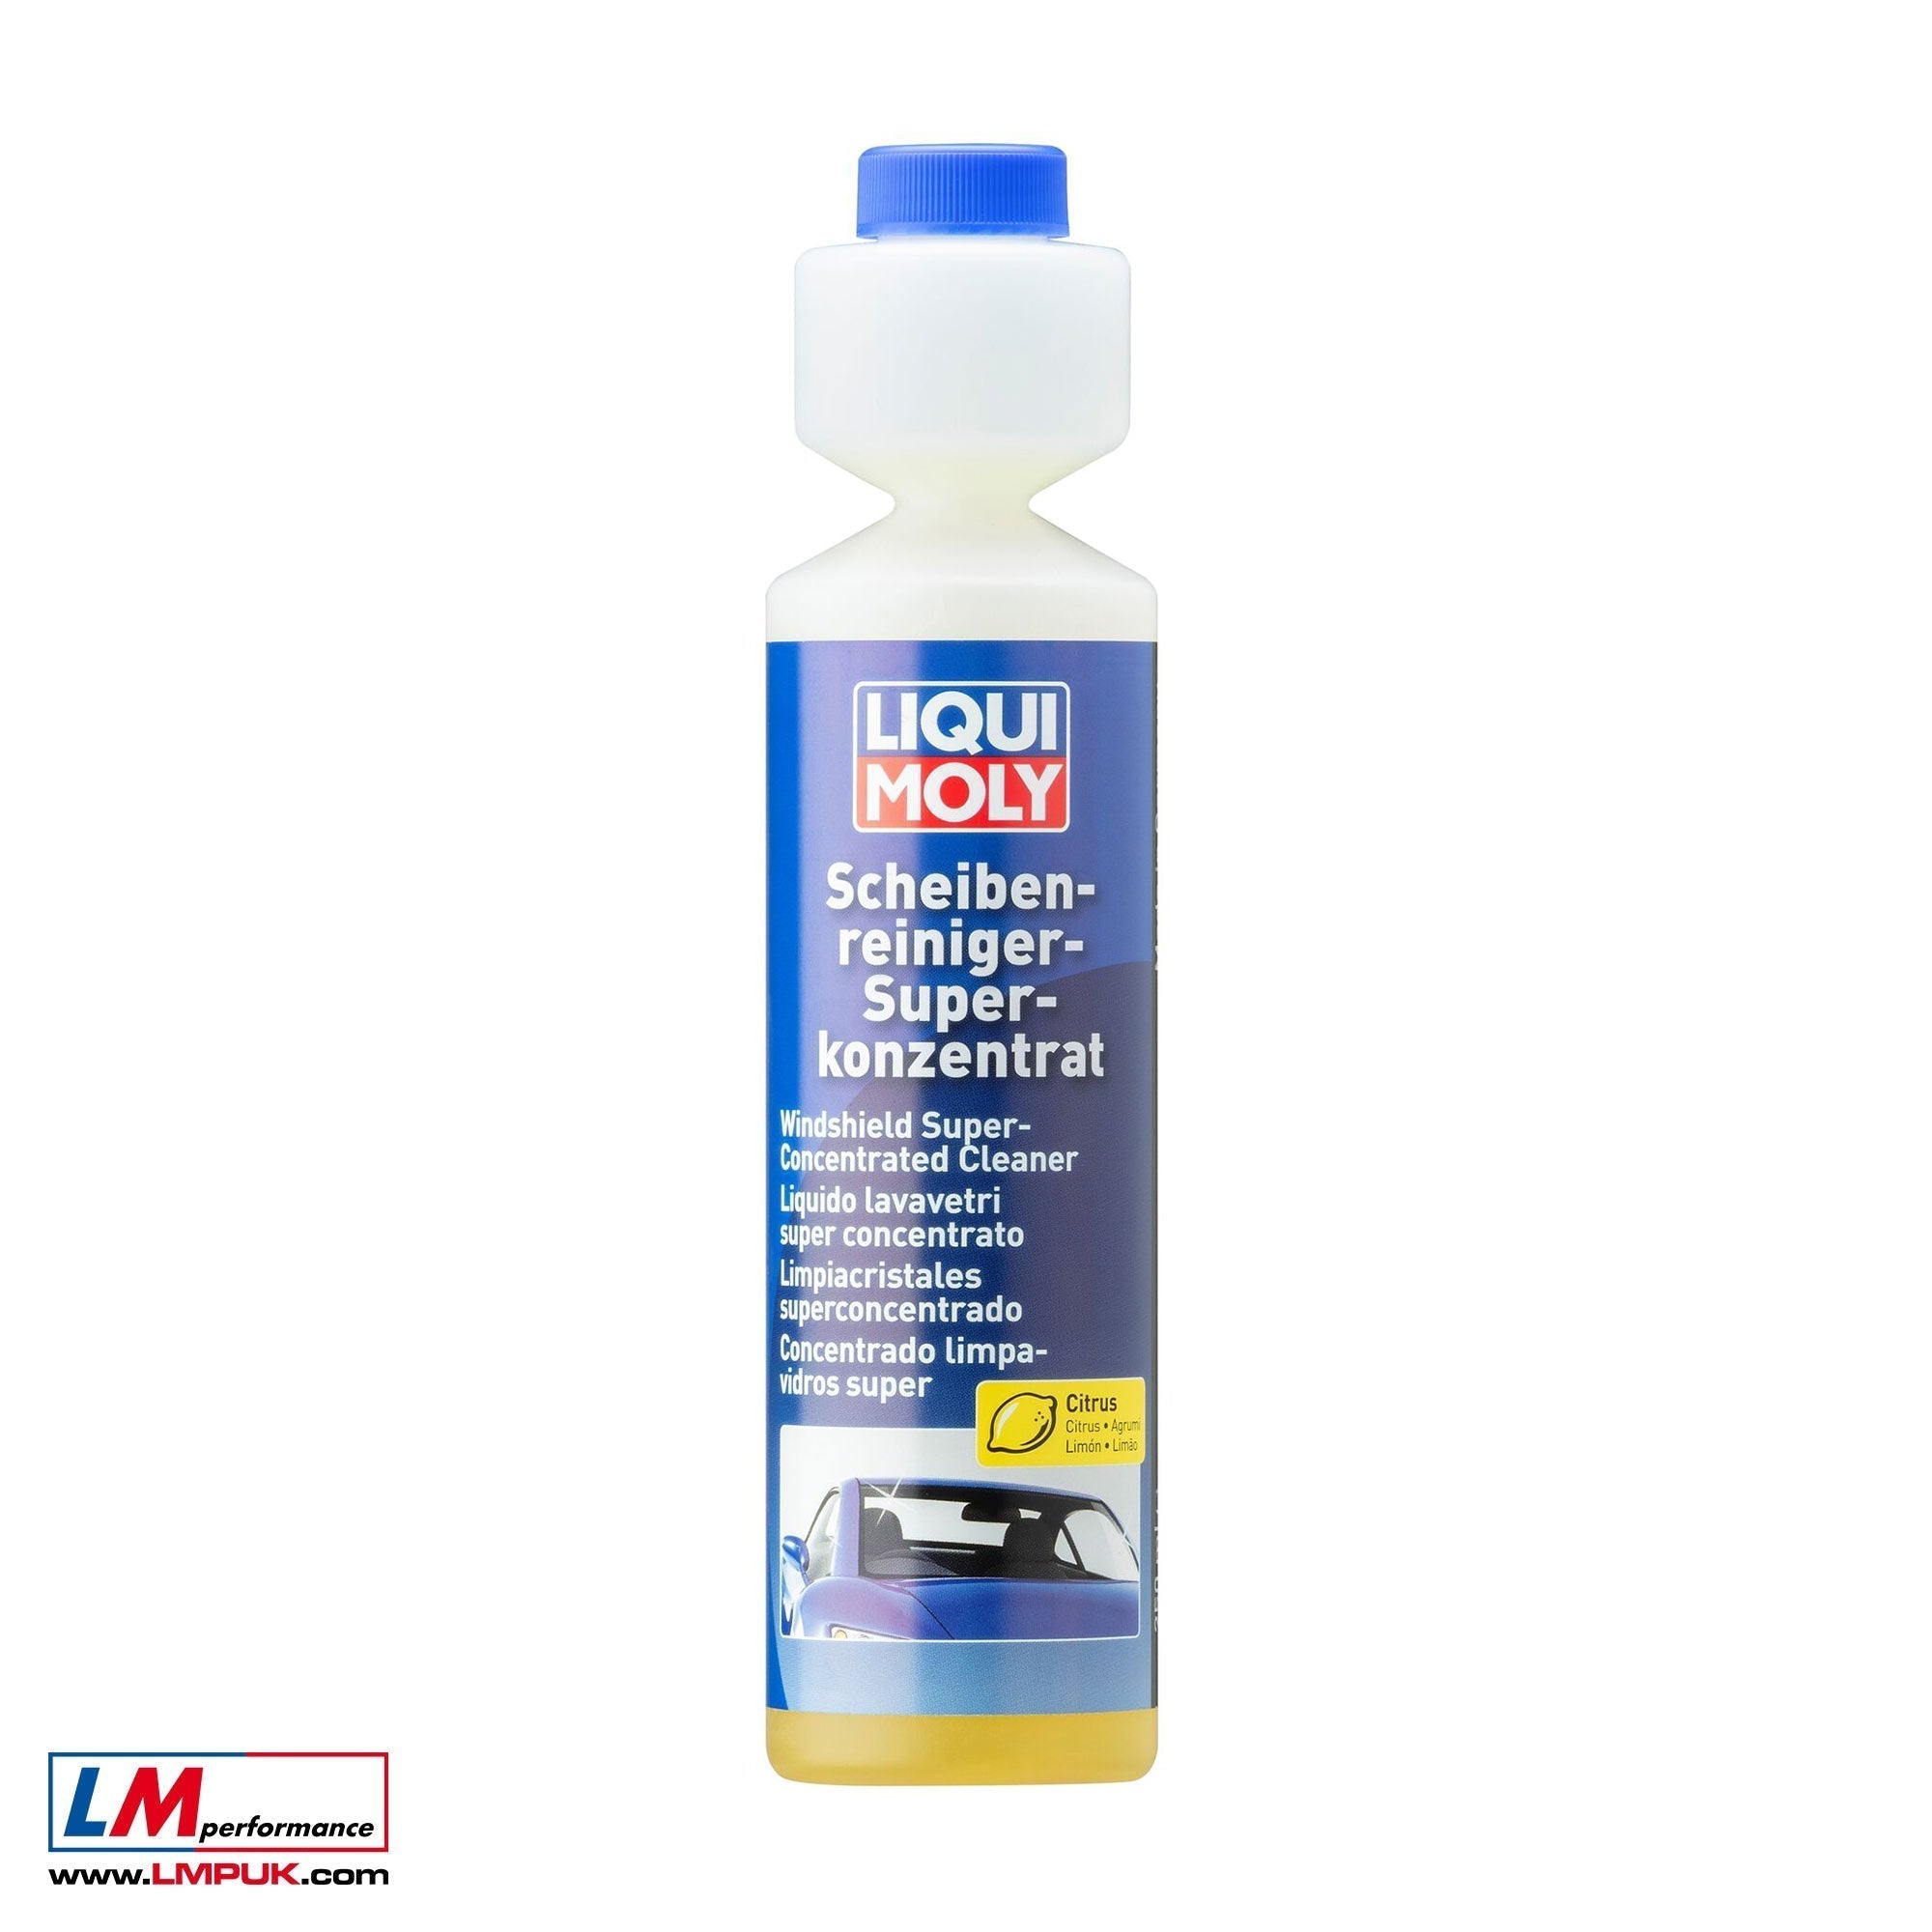 Windshield Super-Concentrated Cleaner by LIQUI MOLY – LM Performance